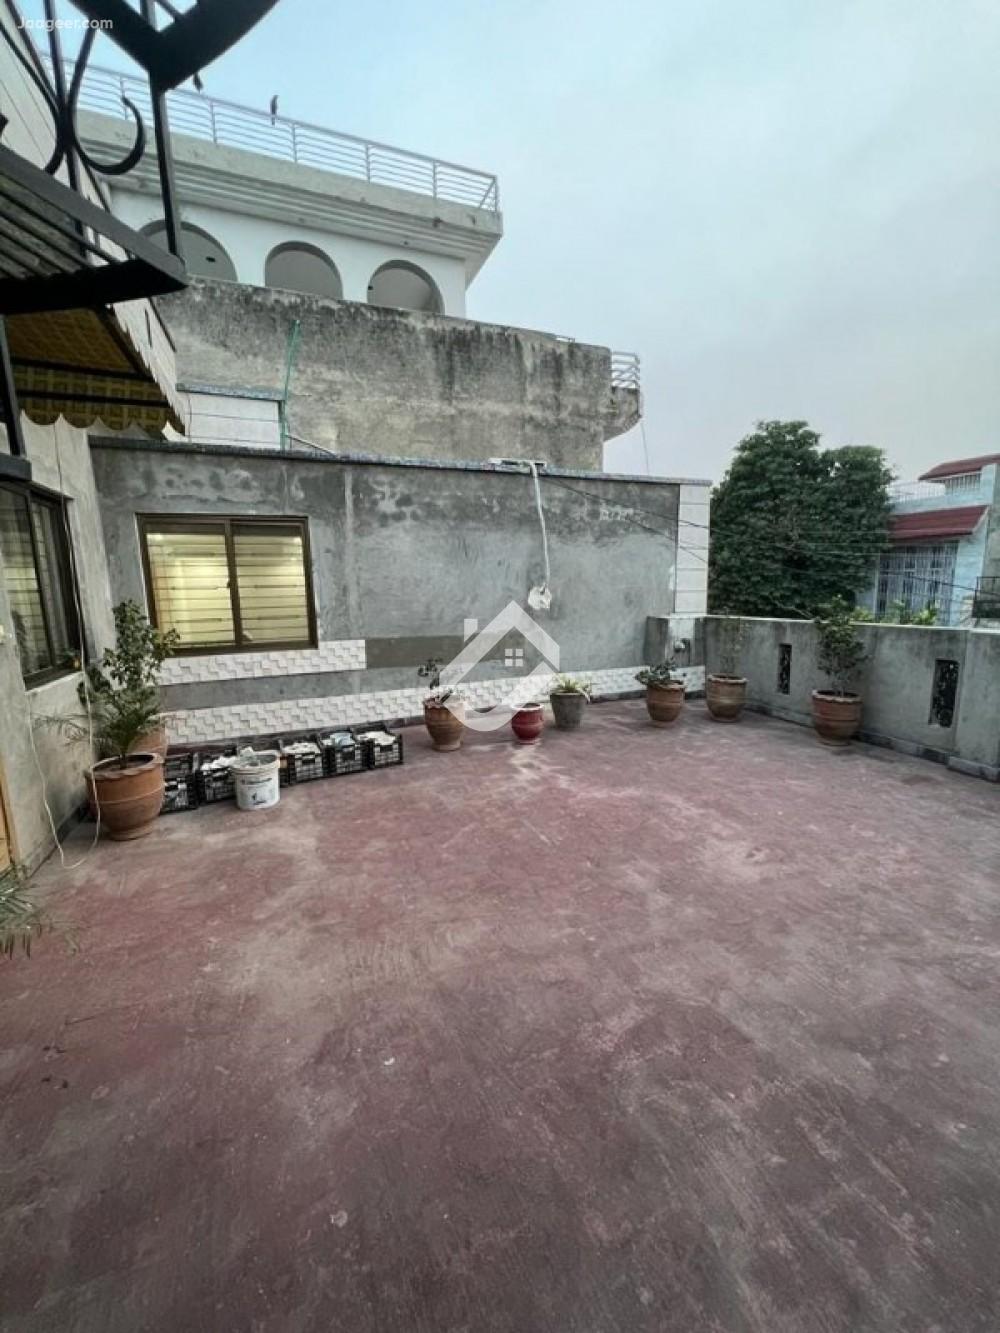 Main image 7 Marla Double Storey House For Sale In Faisal Town  Faisal Town, Lahore